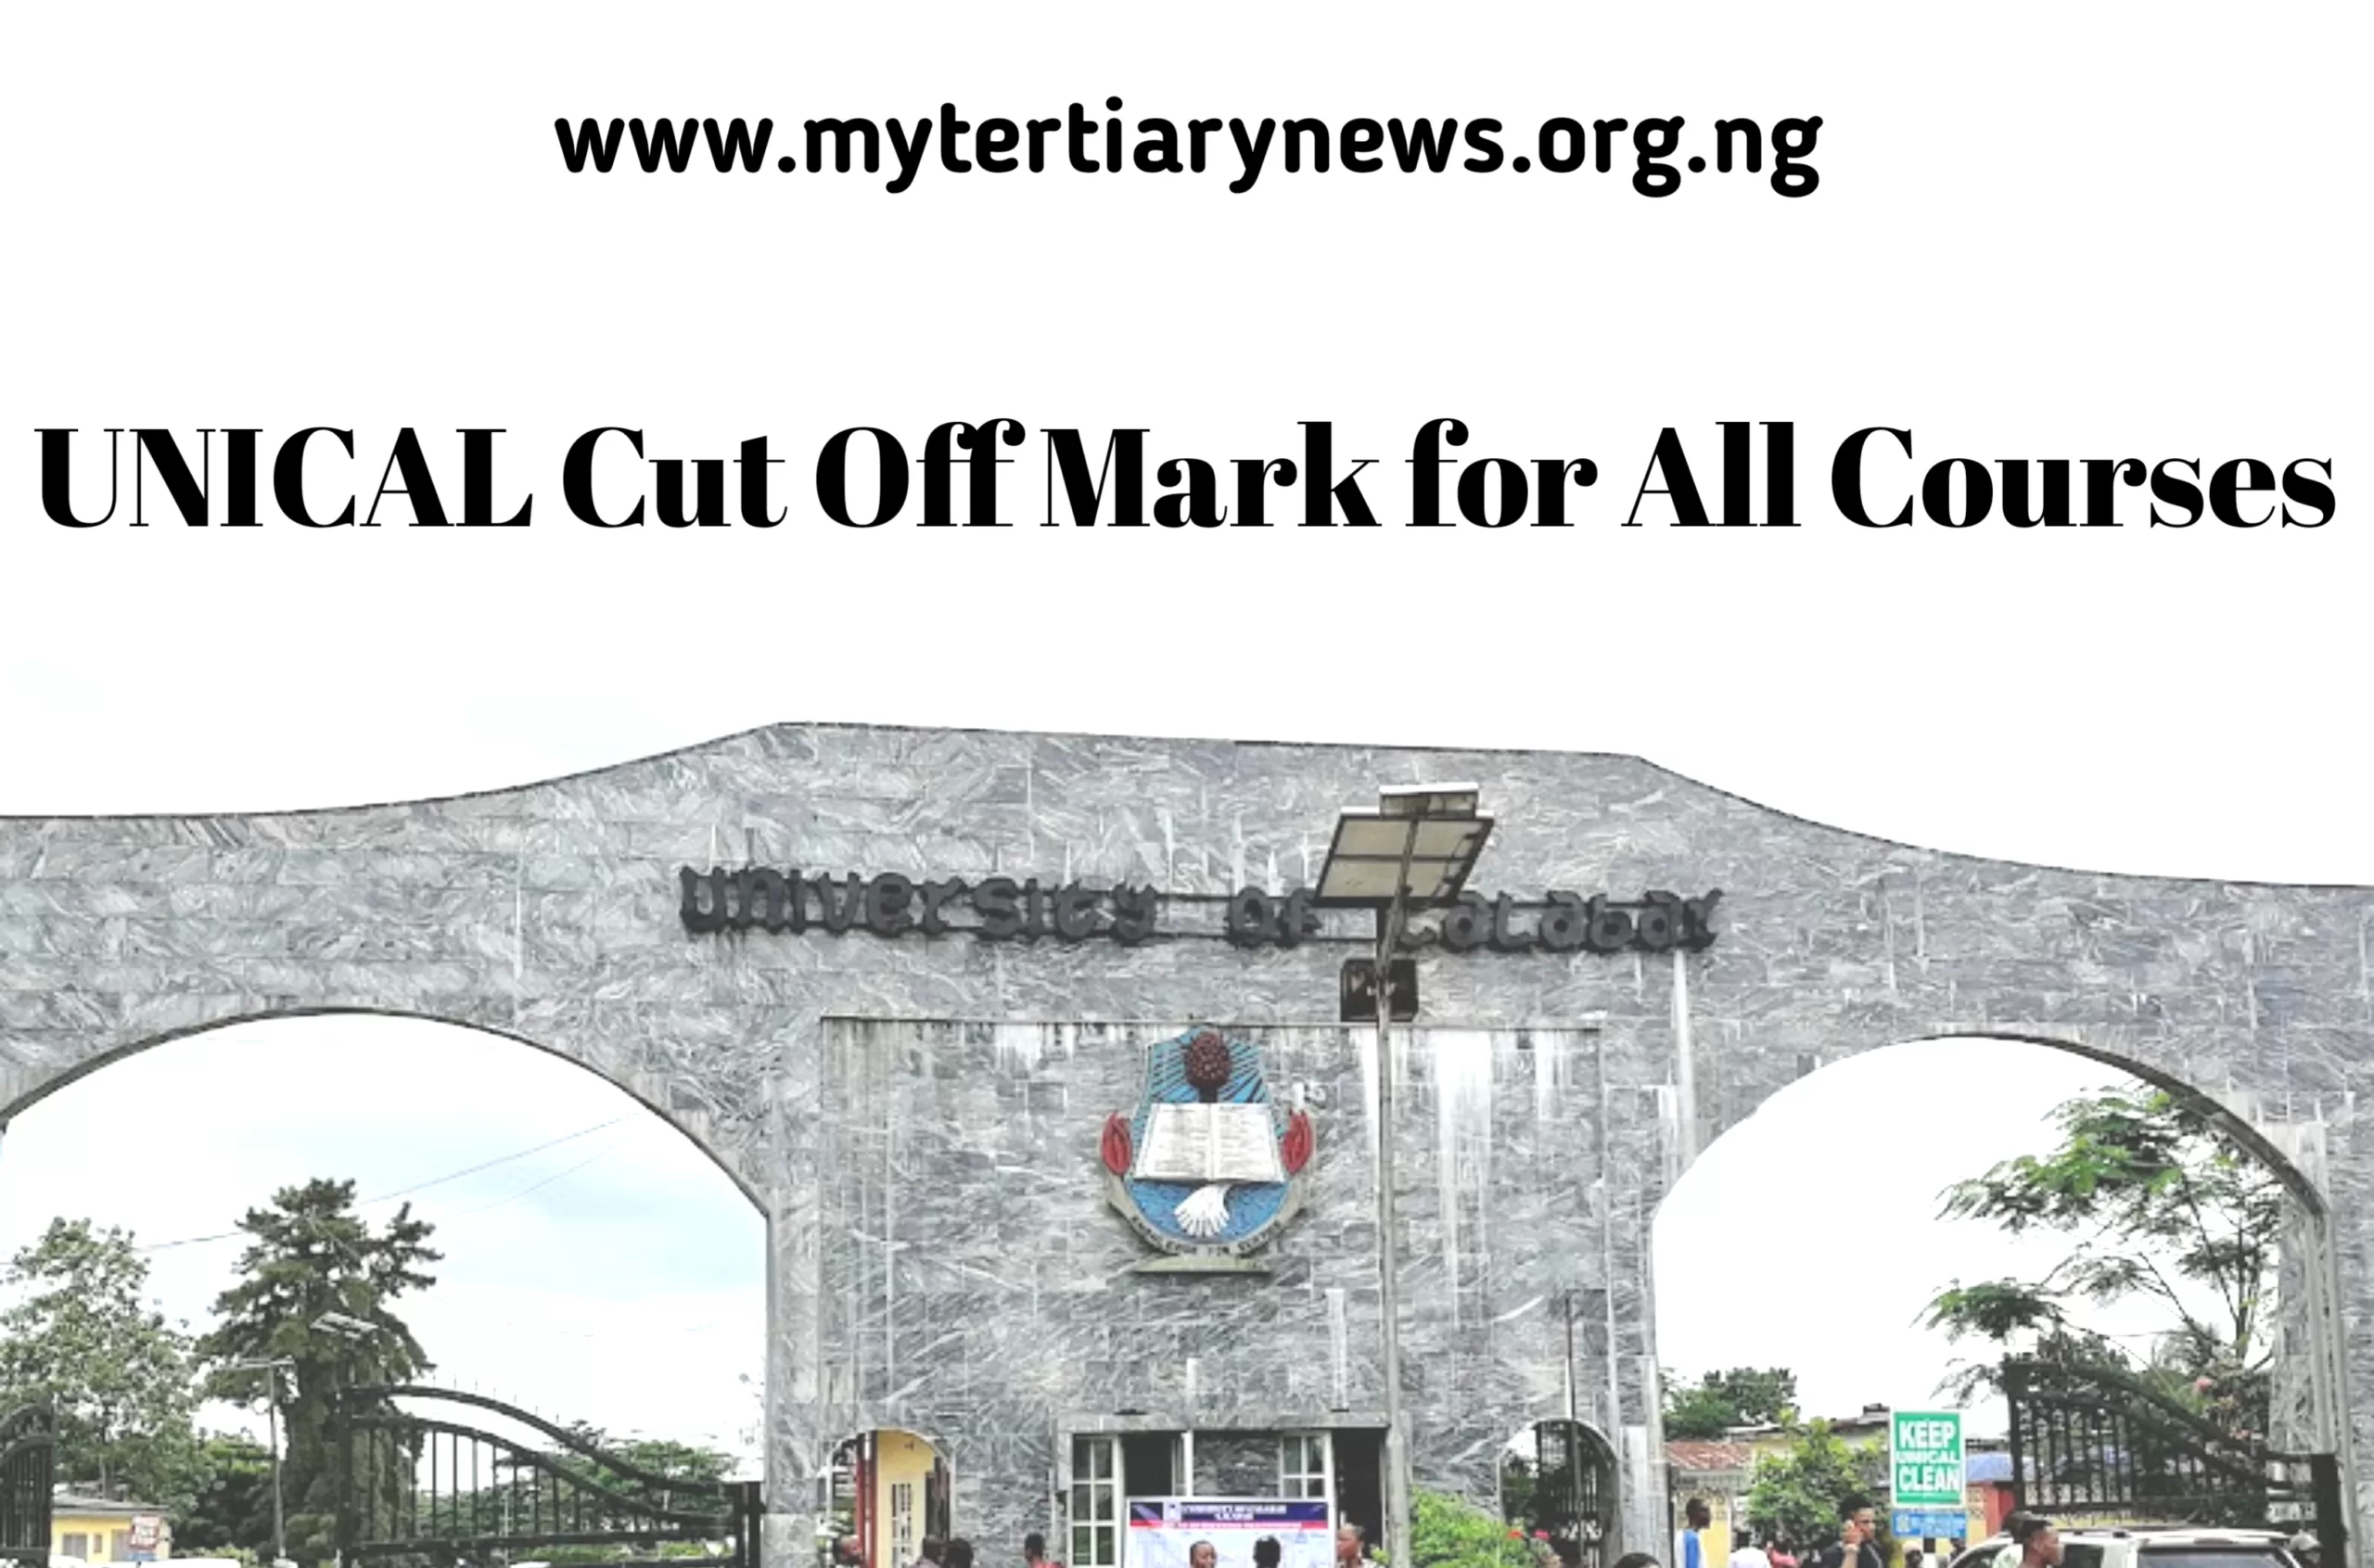 UNICAL Image || UNICAL Cut Off Mark for All Courses